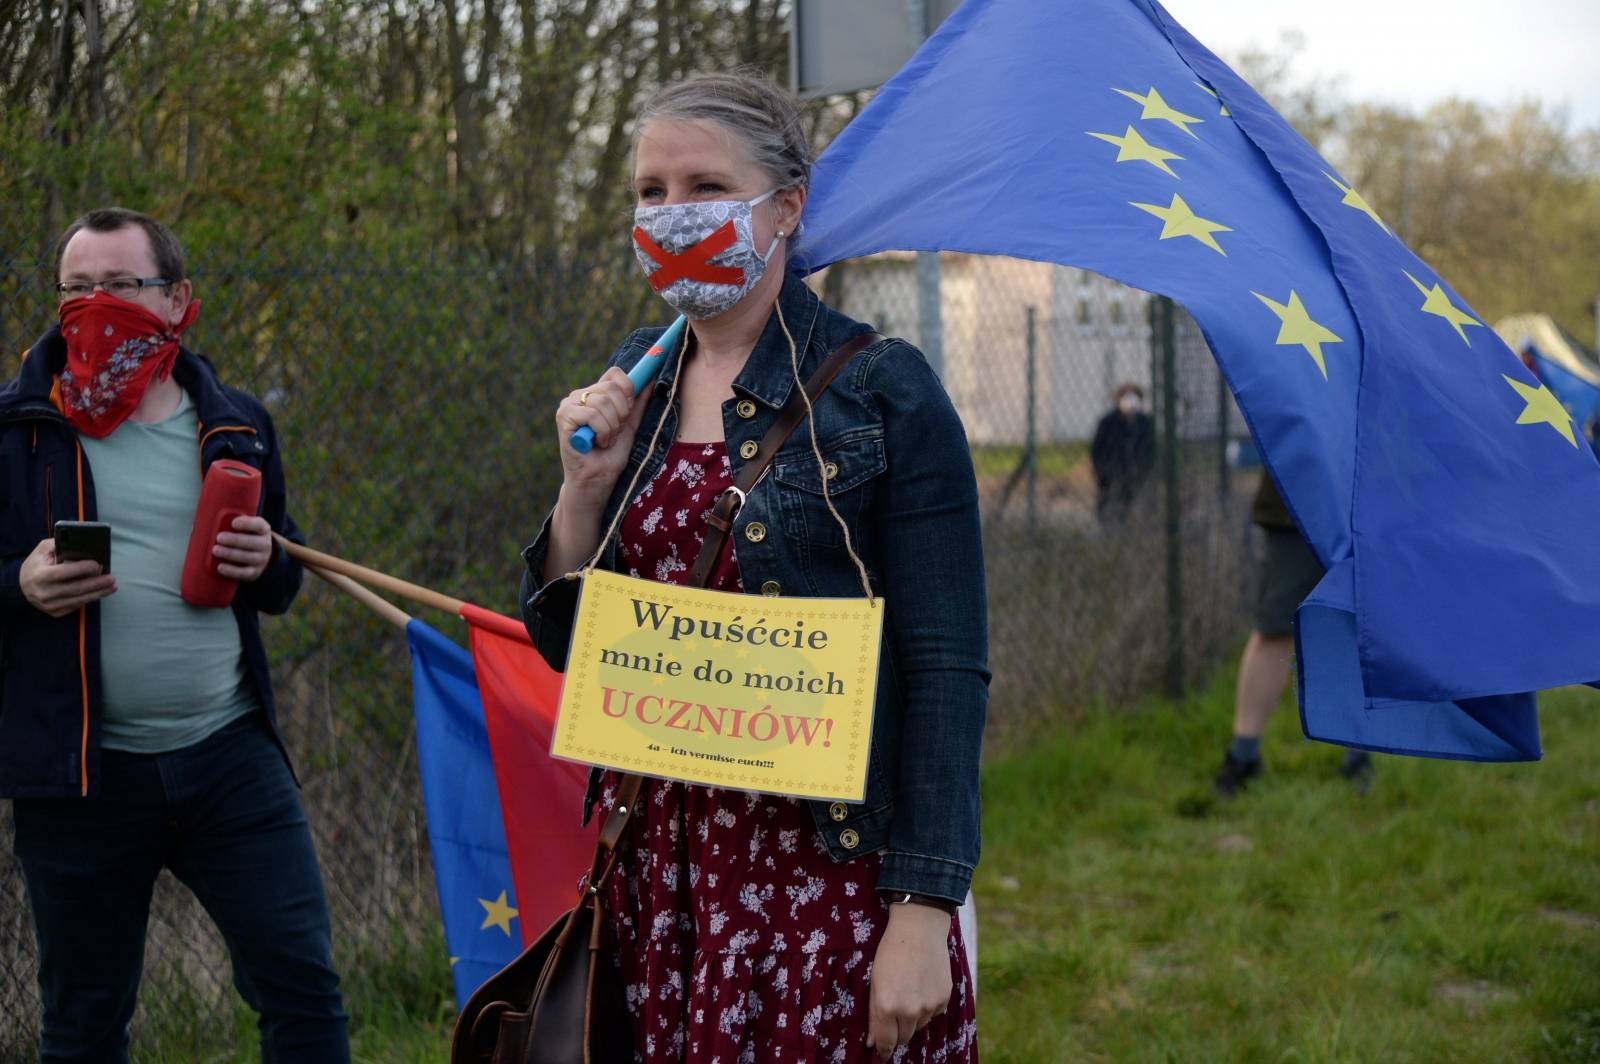 Cross-border workers stage protest at Polish-German border demanding to be exempt from the mandatory quarantine during coronavirus disease (COVID-19) outbreak at the crossing in Rosowek